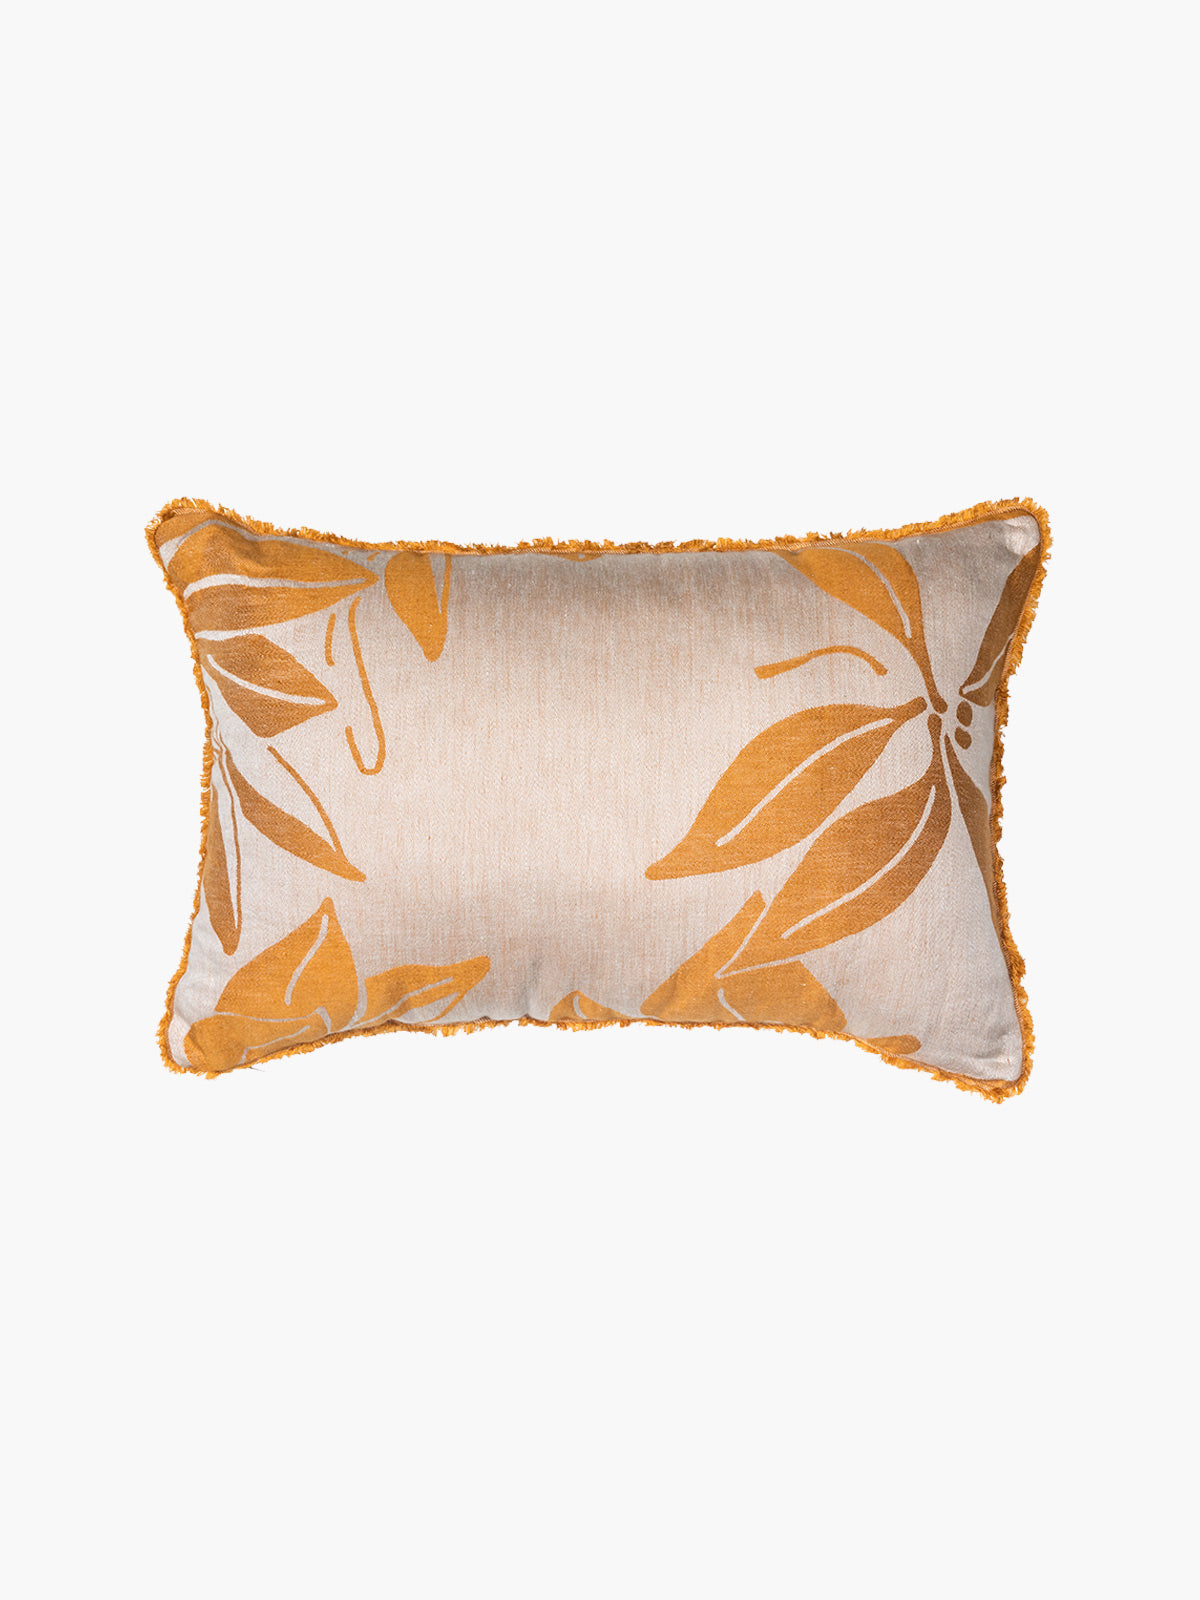 Cushion Cover With Recovered Fringe 45 x 30 | Giallo Rame Cushion Cover With Recovered Fringe 45 x 30 | Giallo Rame